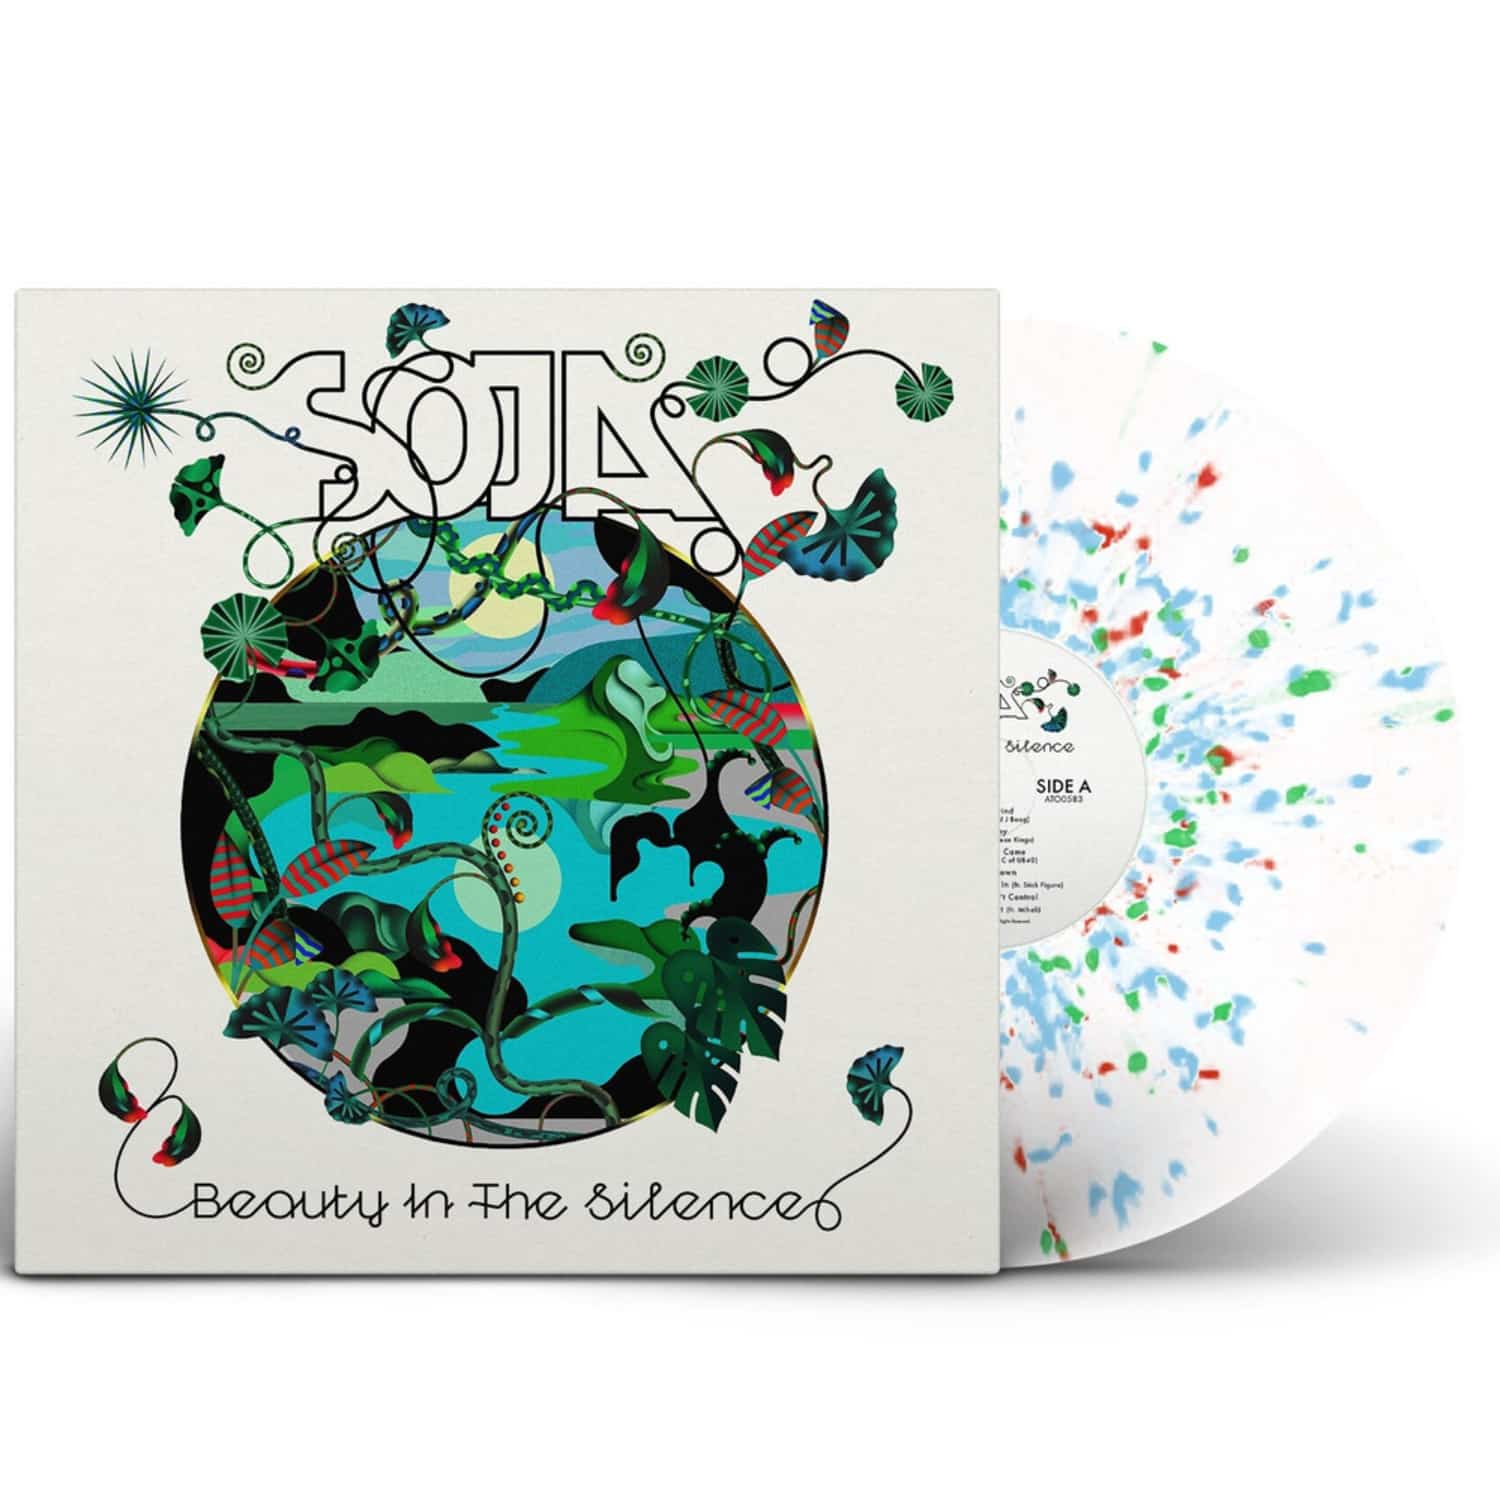 Soja - BEAUTY IN THE SILENCE 